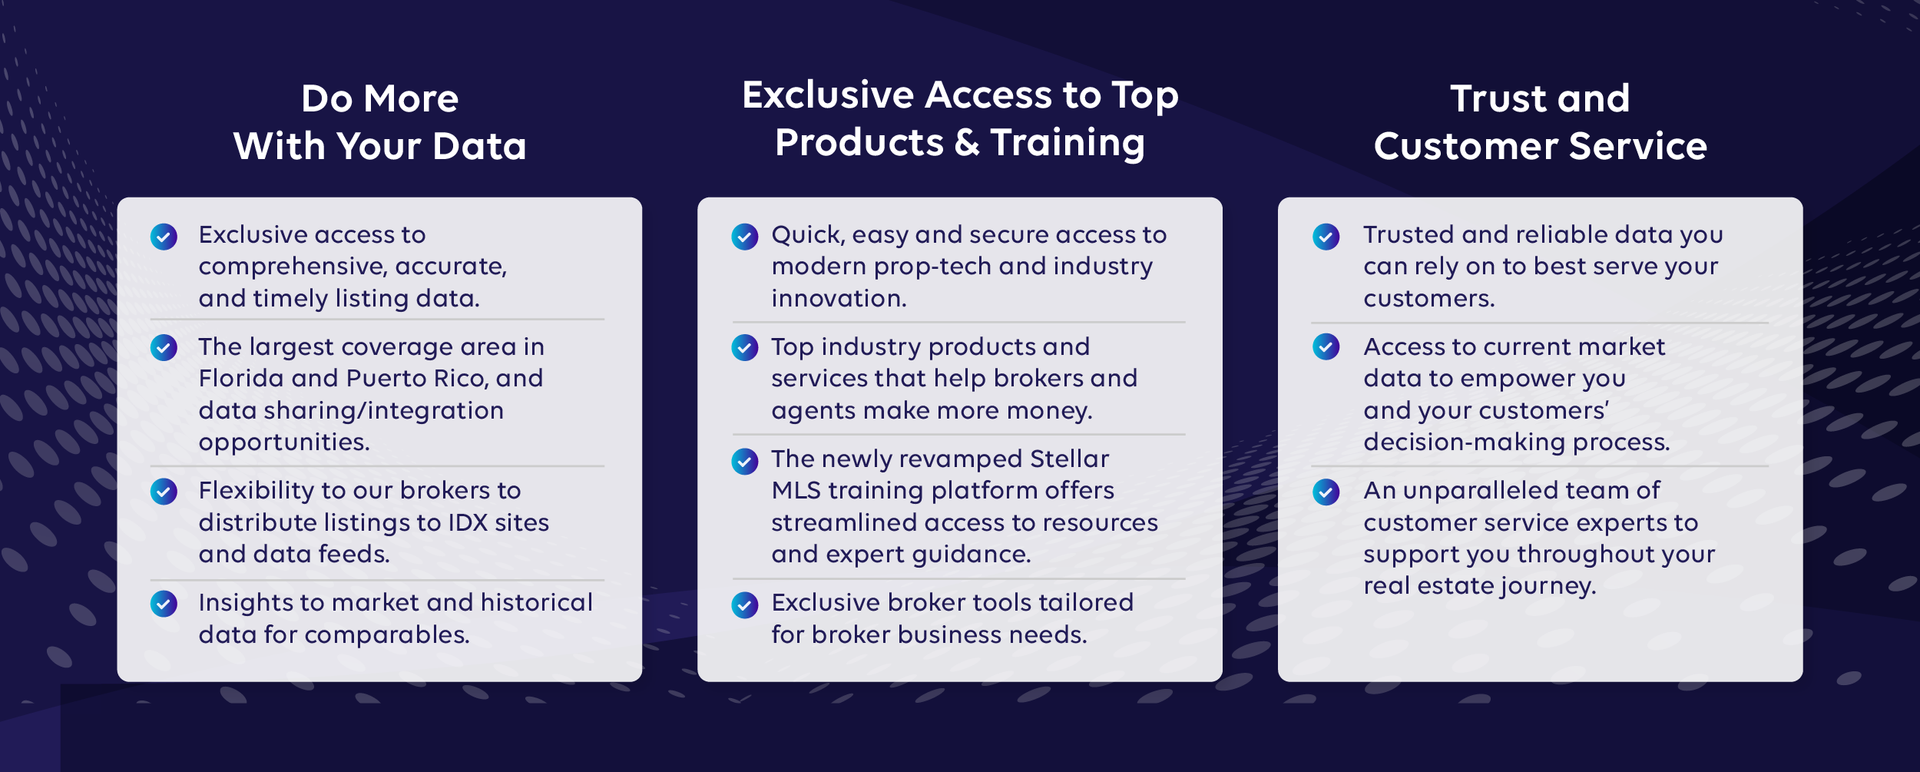 Benefits: Do More With Your Data, Exclusive Access to Top Products & Training, Trust and Customer Service